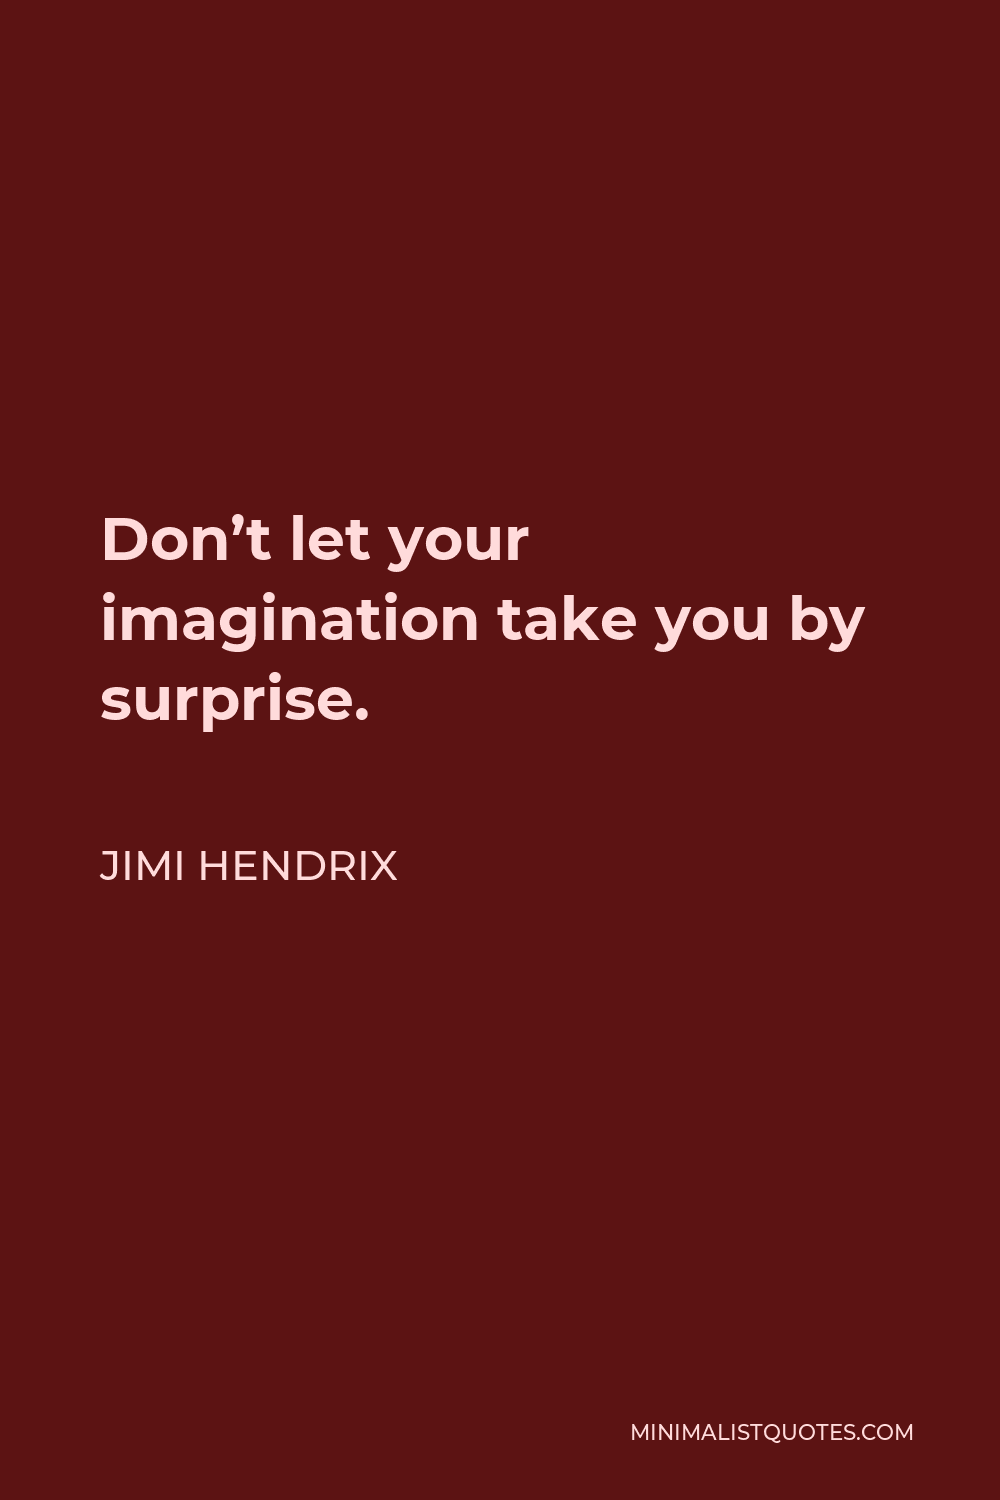 Jimi Hendrix Quote - Don’t let your imagination take you by surprise.